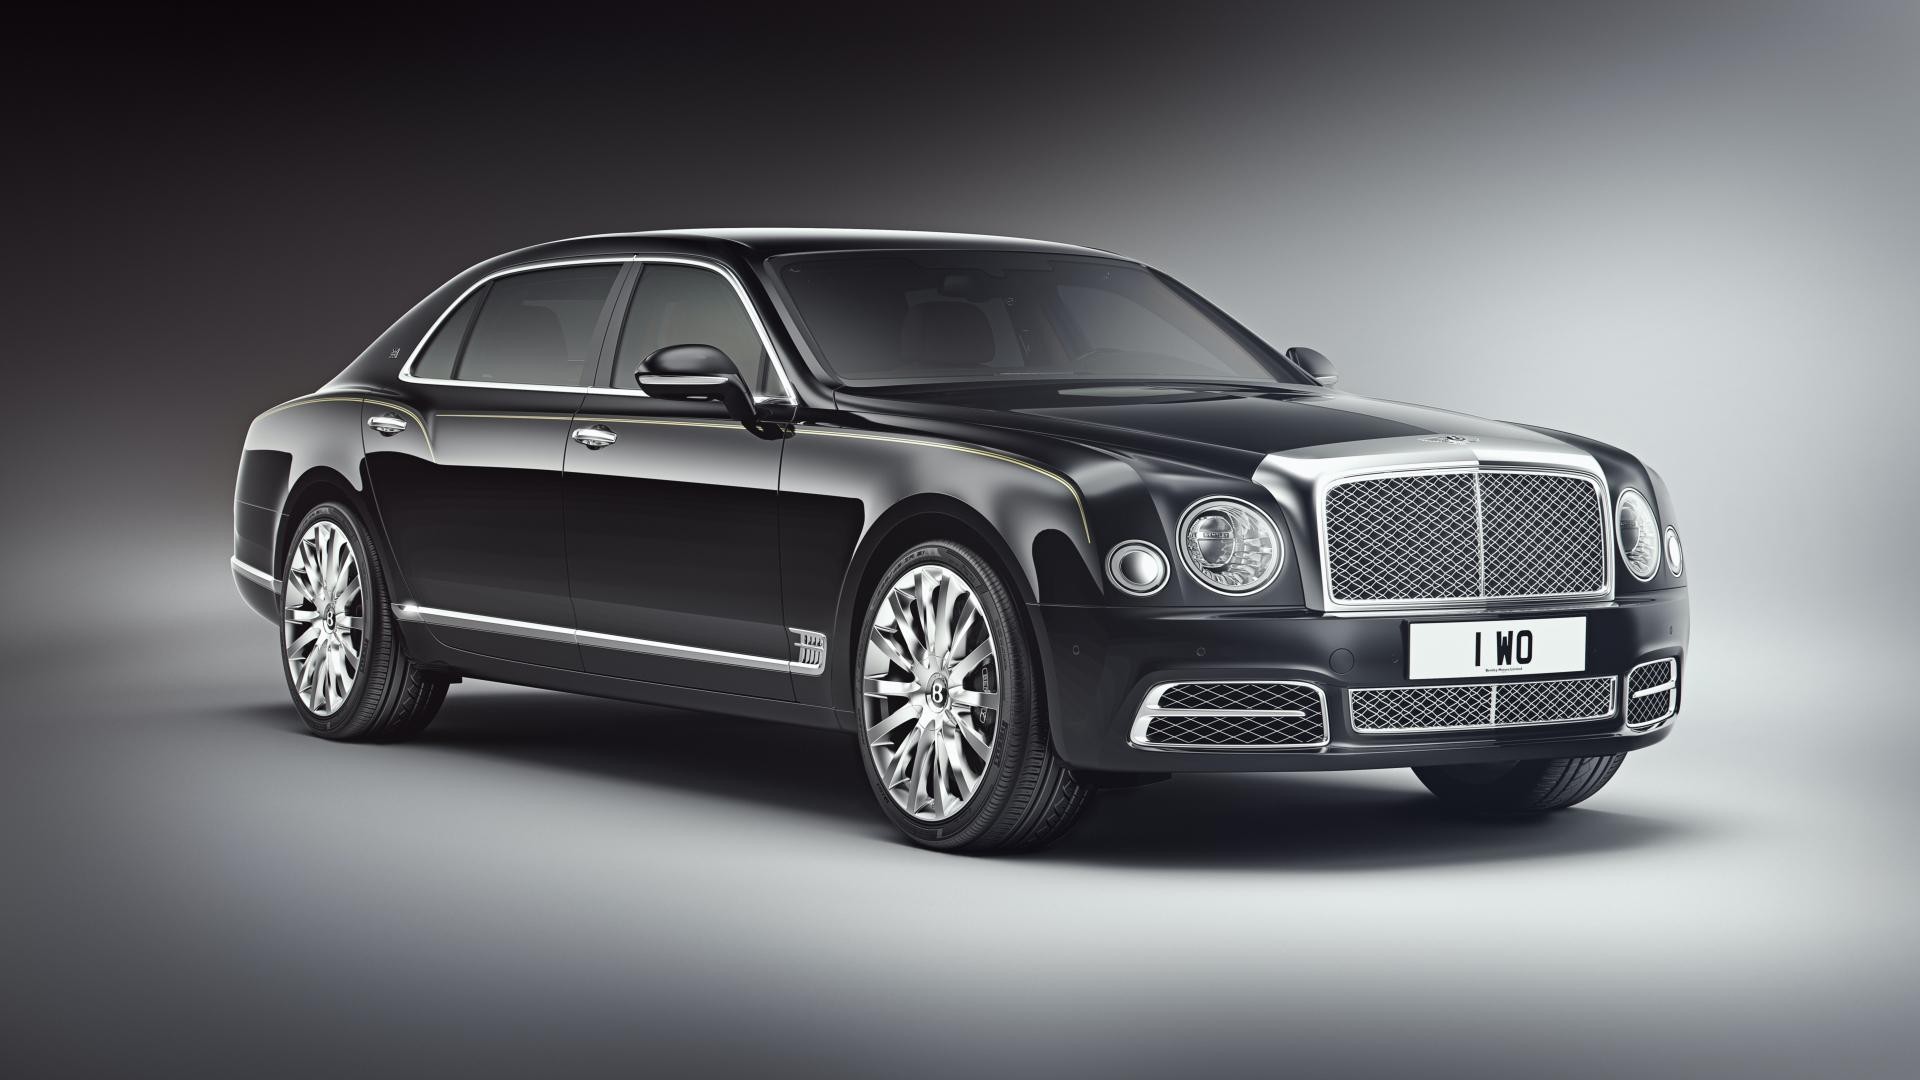 Bentley Mulsanne Extended Wheelbase Limited Edition: solo 15 unidades